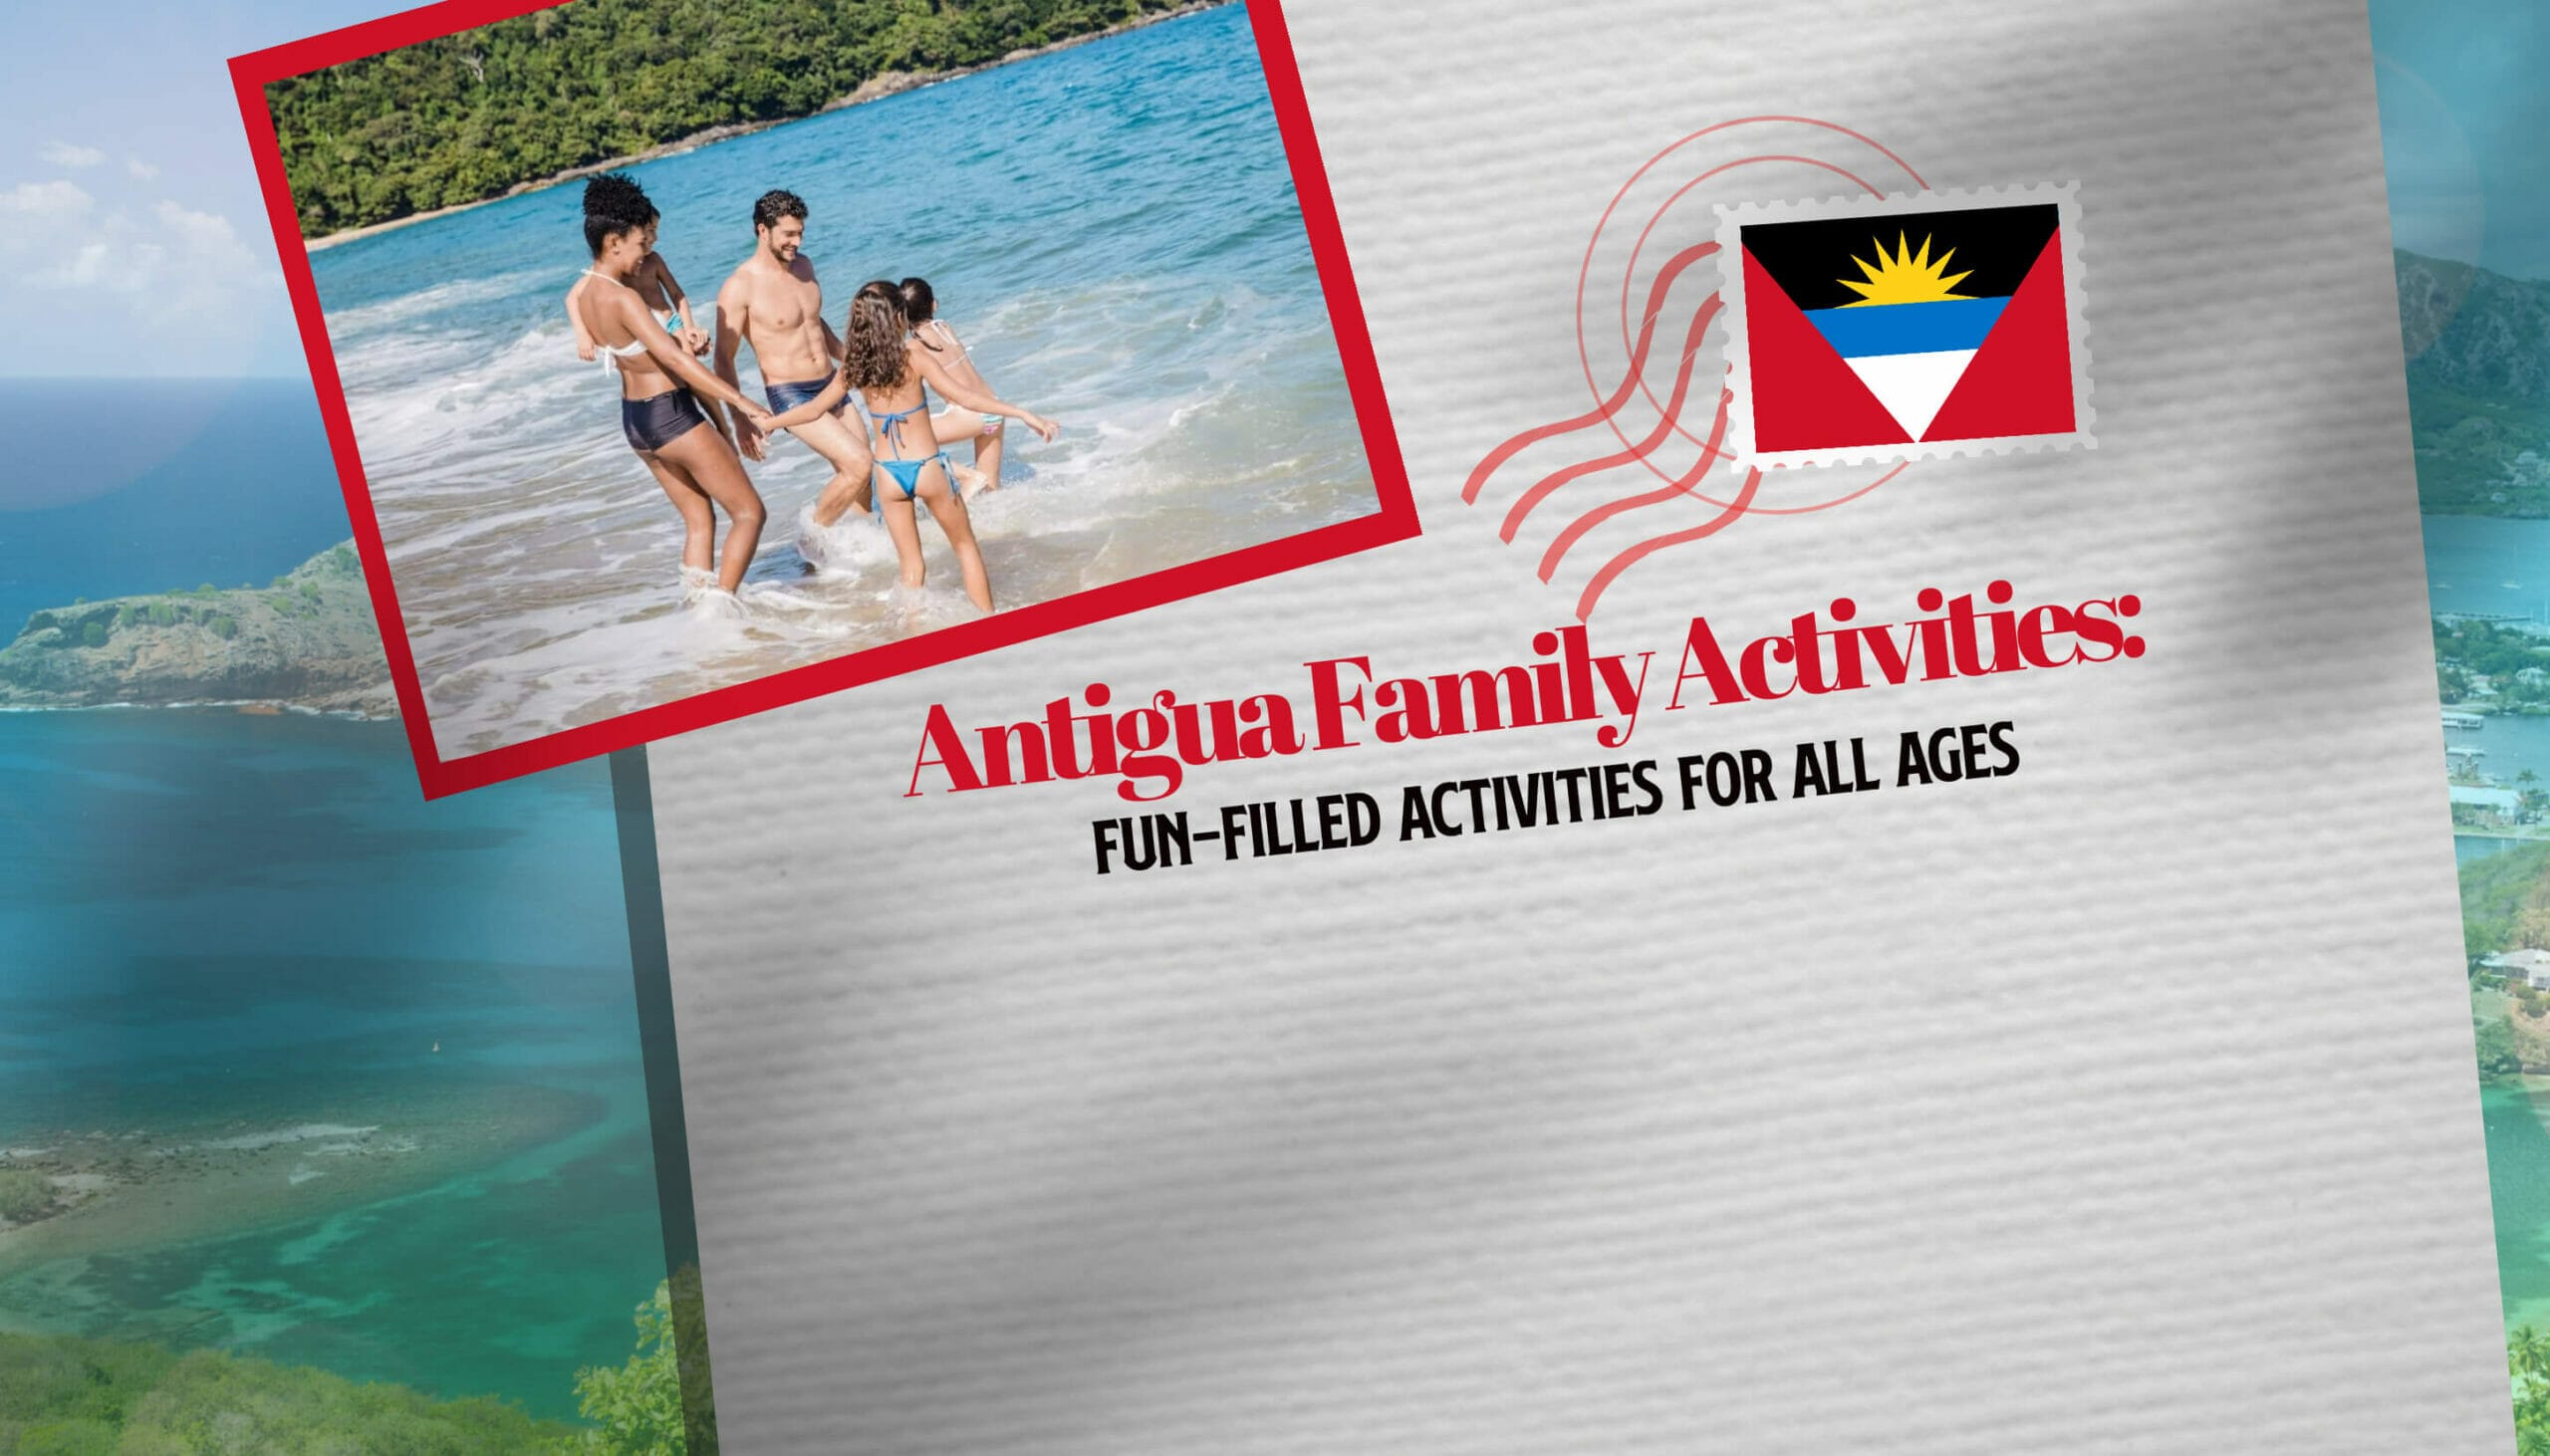 Antigua Family Activities Fun-Filled Activities for All Ages